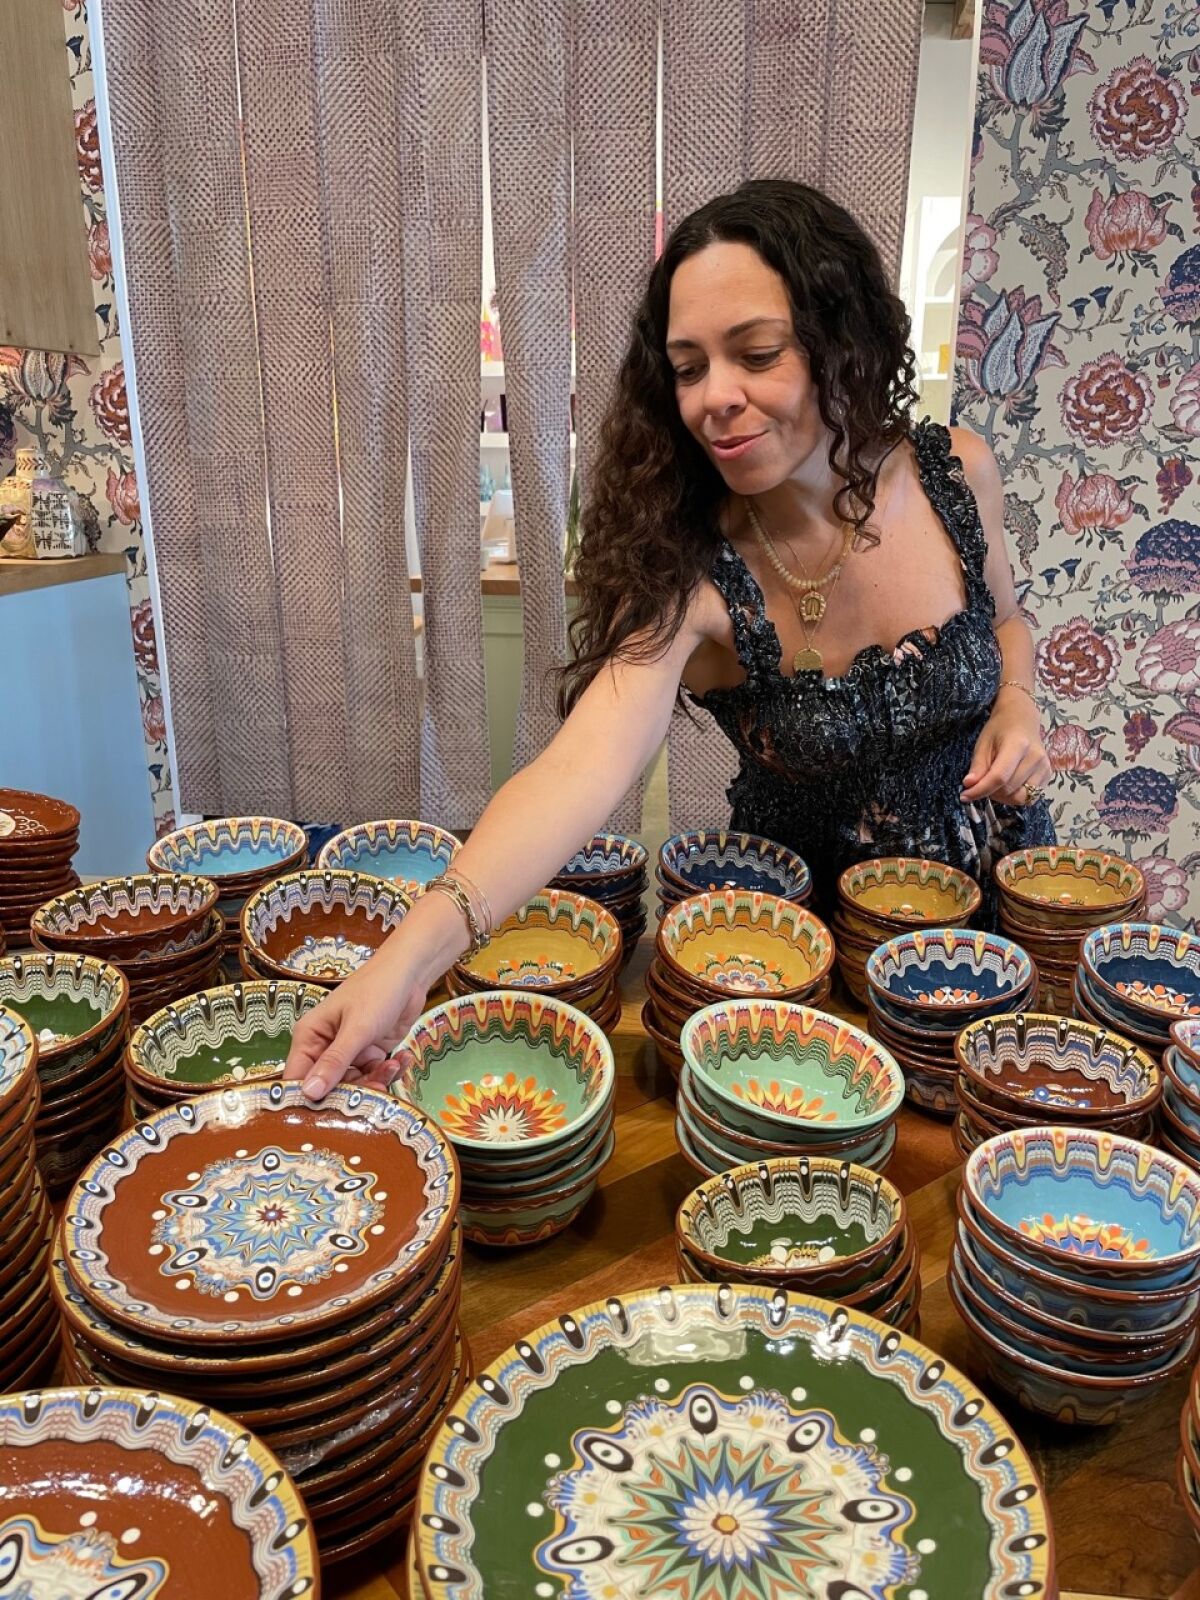 A woman arranges colorful ceramic plates and bowls on a table.